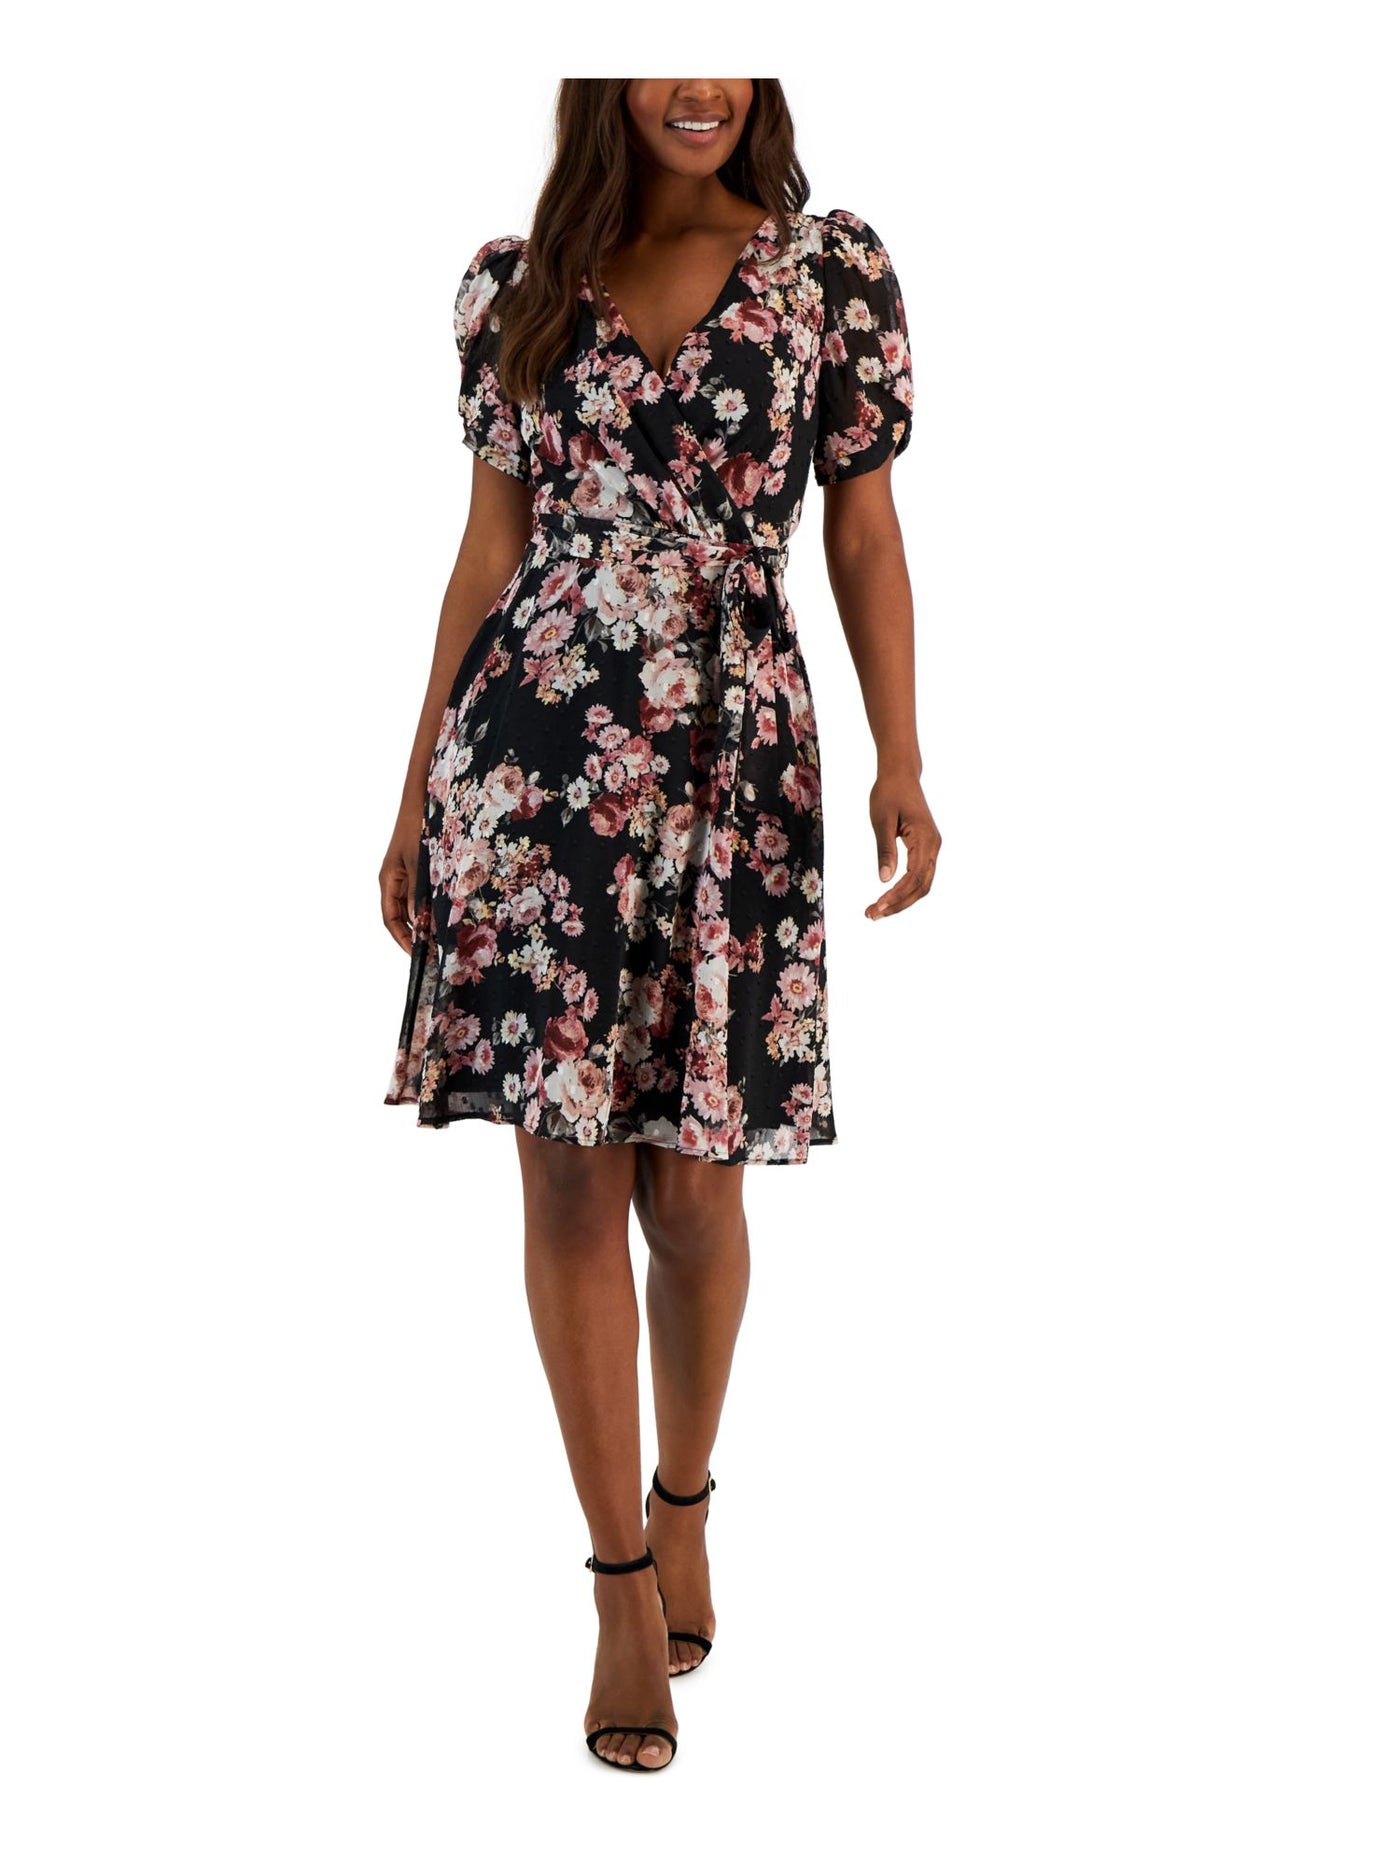 CONNECTED APPAREL Womens Black Zippered Lined Sheer Tie Belt Floral Short Sleeve Surplice Neckline Above The Knee Fit + Flare Dress 4